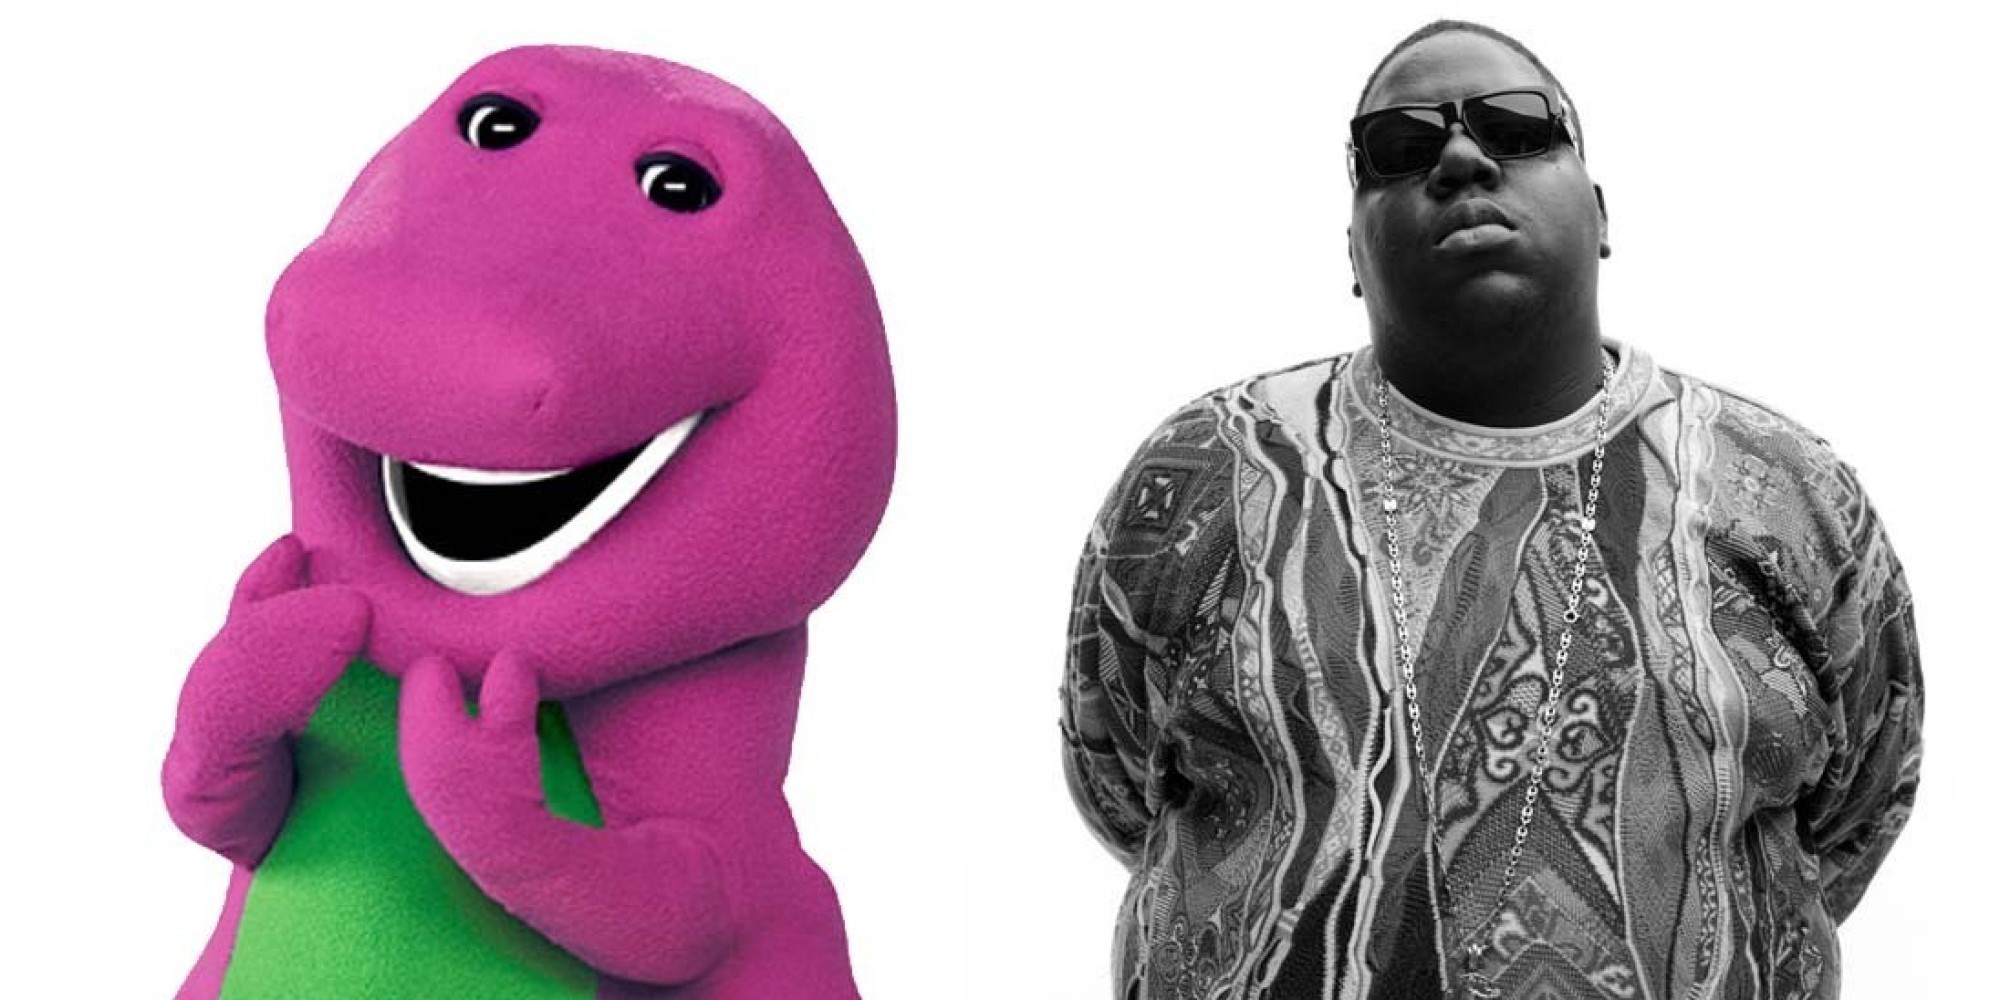 You'll Never Look At Barney The Same After You Watch This Notorious B.I.G. Big Poppa Mashup